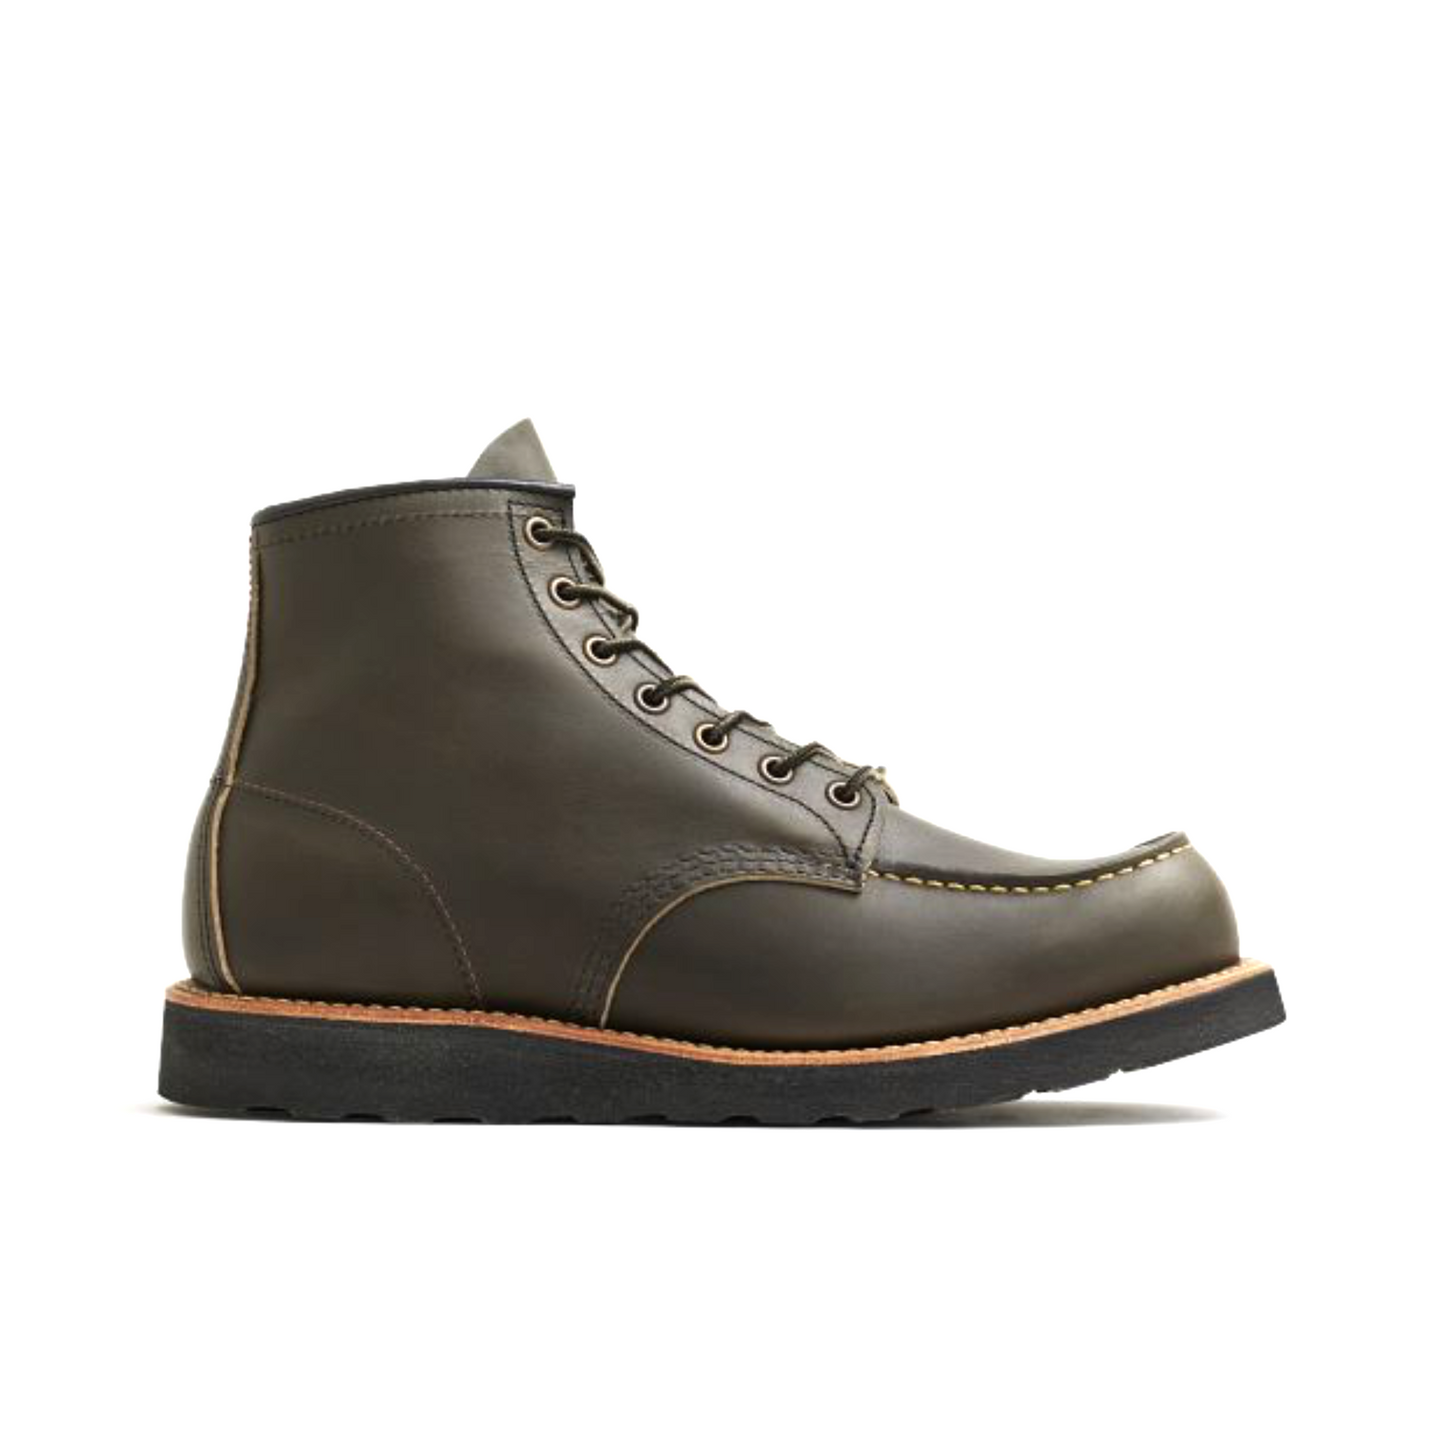 RED WING 8828 CLASSIC MOC BOOT MEN